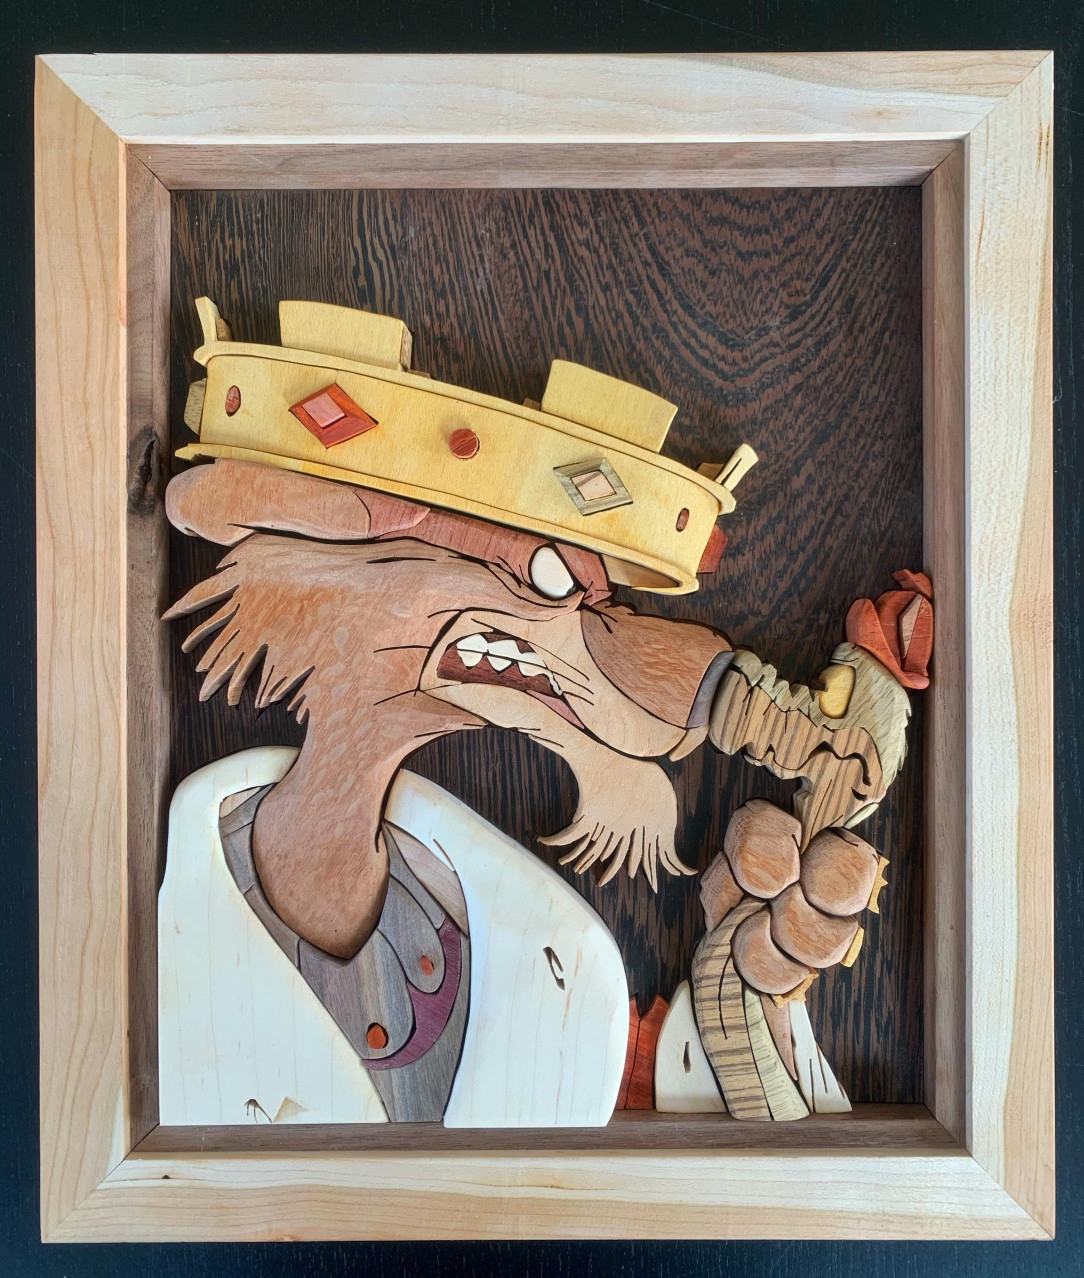 Woodwork of Prince John and Hiss of Robin Hood - all natural wood with no stains or dyes. 11”x9”